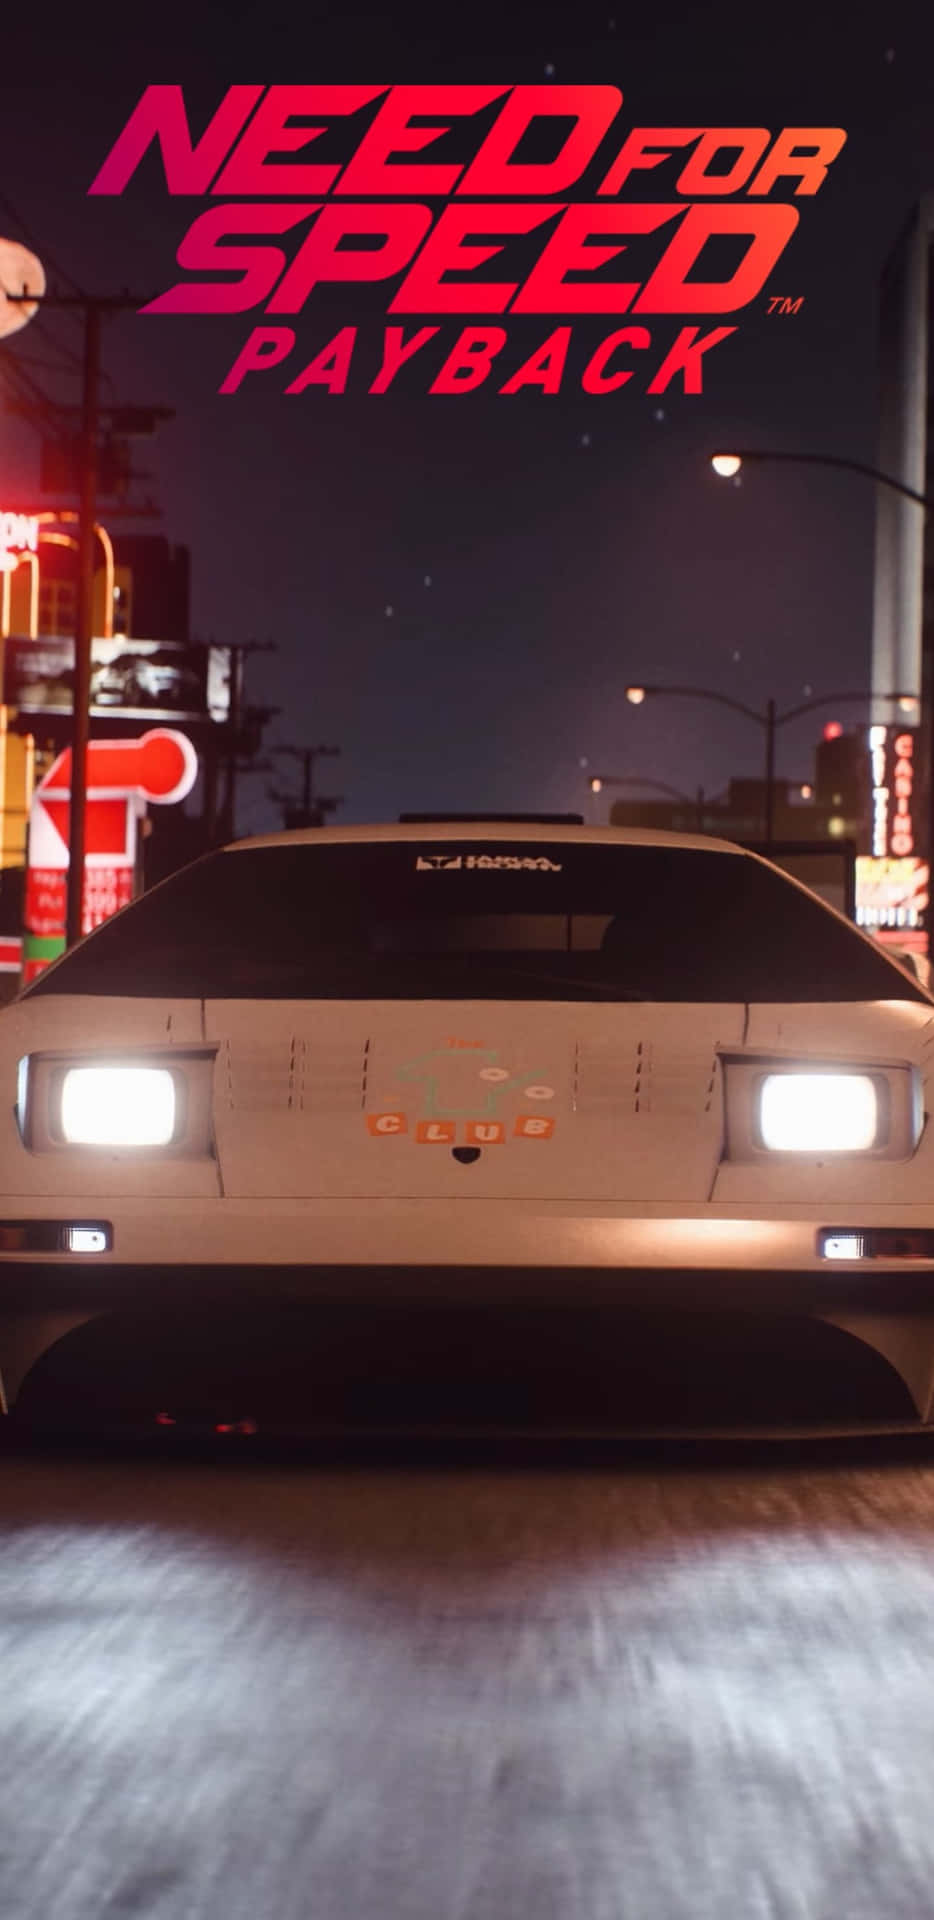 Immerse yourself in the Need for Speed Payback experience with Pixel 3XL